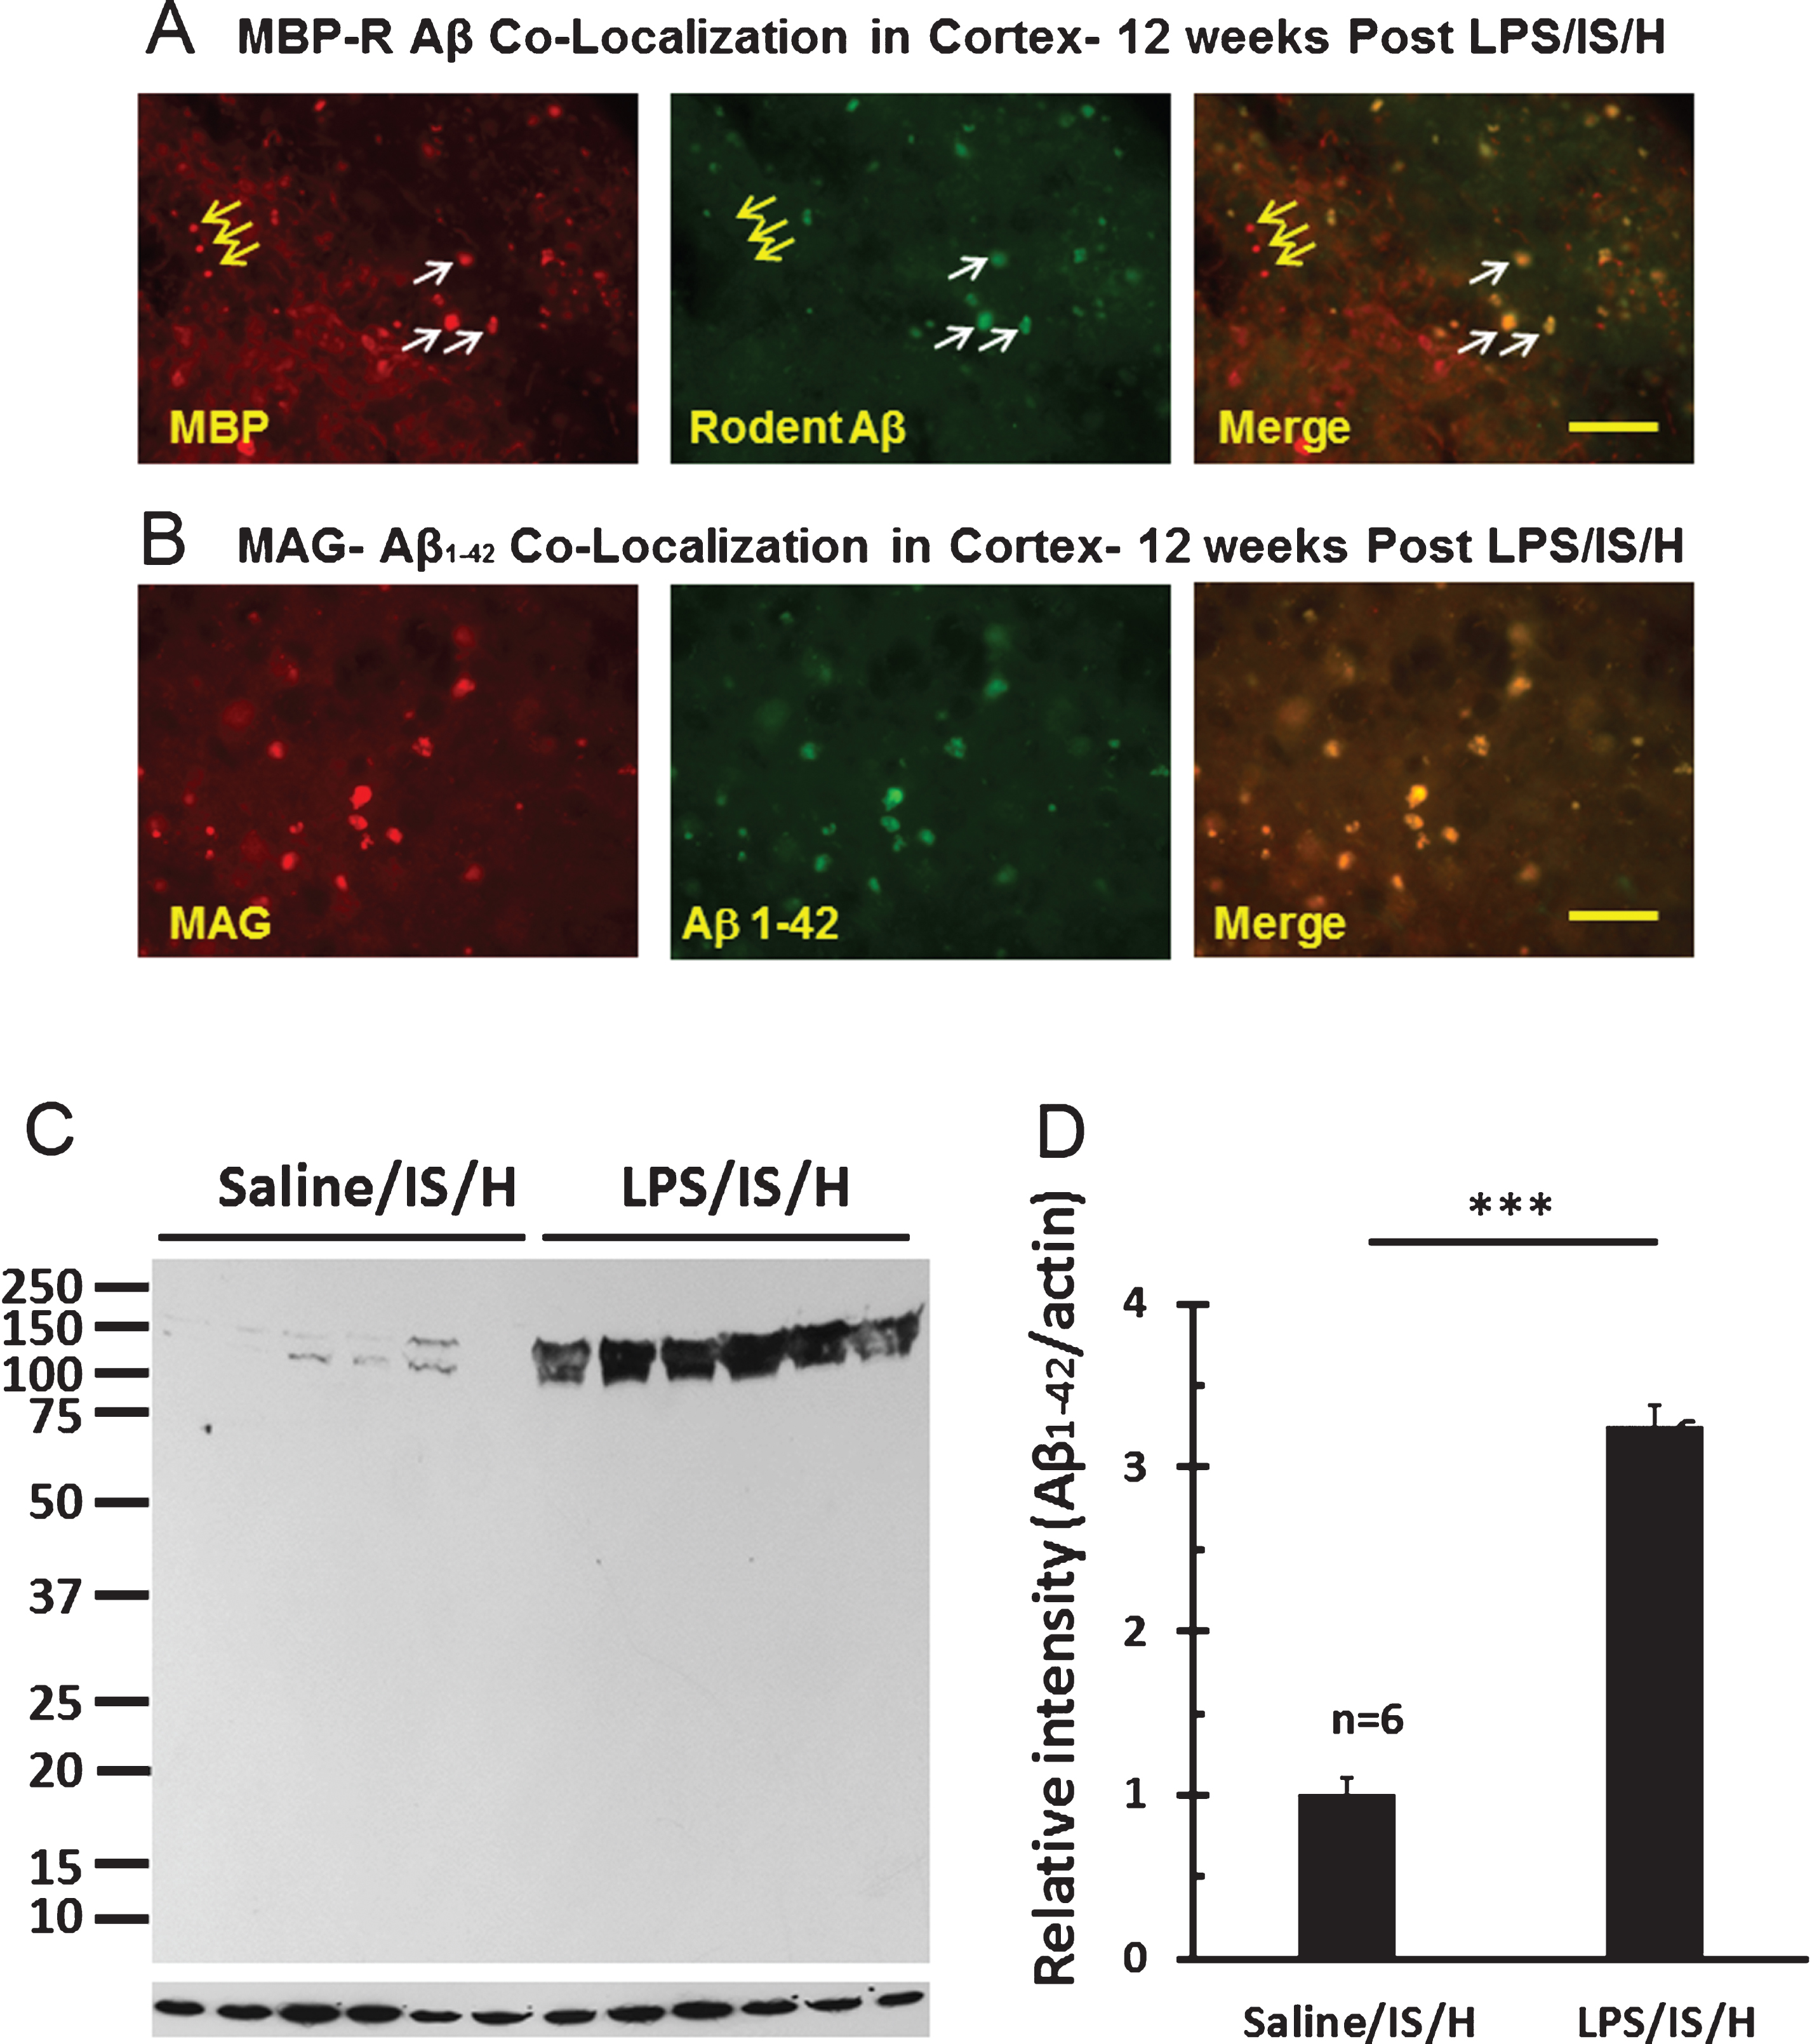 Co-localization of myelin aggregates with rodent Aβ and Aβ1 - 42 expression in the hemisphere ipsilateral to ischemia at 12 weeks following LPS/IS/H. A) Myelin aggregates stained with myelin basic protein (MBP) co-localized with rodent Aβ (R Aβ) deposits. Most of the MBP stained foci co-localized with rodent Aβ (white arrows, Merge) whereas some did not (yellow arrows). R Aβ likely represents AβPP. B) Myelin associated glycoprotein (MAG) co-localized with Aβ1 - 42 deposits. MAG immunostained foci in cortex co-localized with Aβ1 - 42 (B, Merge). Bars = 50 μm. C) Western blot analysis for Aβ1 - 42 at 12 weeks following saline/IS/H and LPS/IS/H. Two bands of ∼150 kDa and ∼140 kDa were detected on Western blots using the Aβ1 - 42 antibody which showed marked induction of both bands following LPS/IS/H compared to saline/IS/H. D) Quantification of the expression of Aβ1 - 42 showed that it markedly increased following LPS/IS/H compared to that following saline/IS/H.  **p <  0.01.